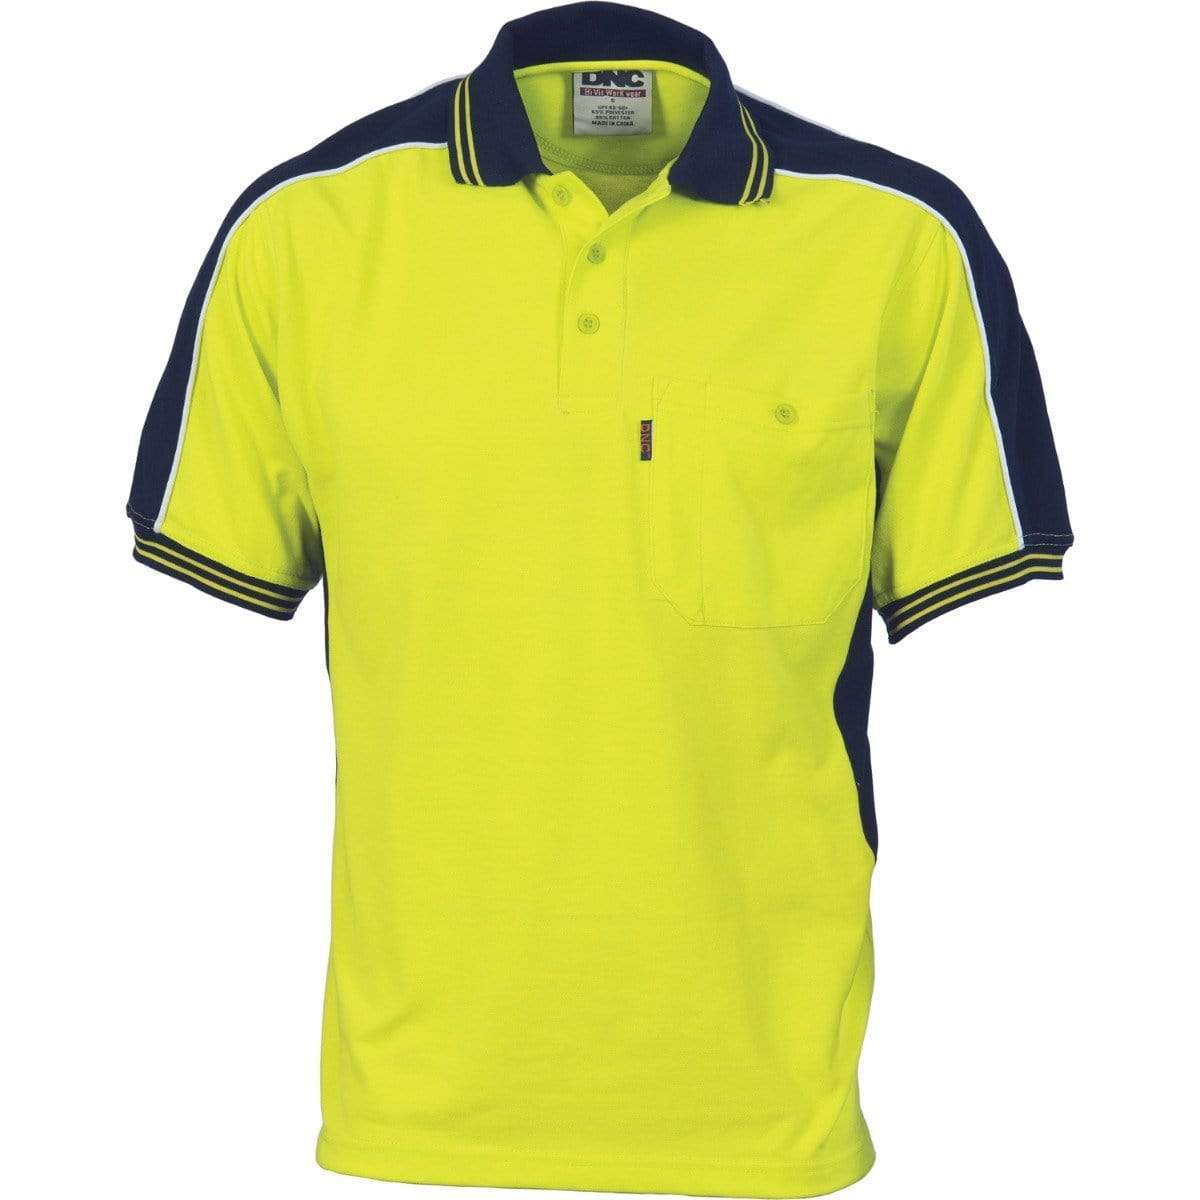 Dnc Workwear Polyester /cotton Contrast Panel Short Sleeve Polo - 3895 Work Wear DNC Workwear Navy/Yellow XS 